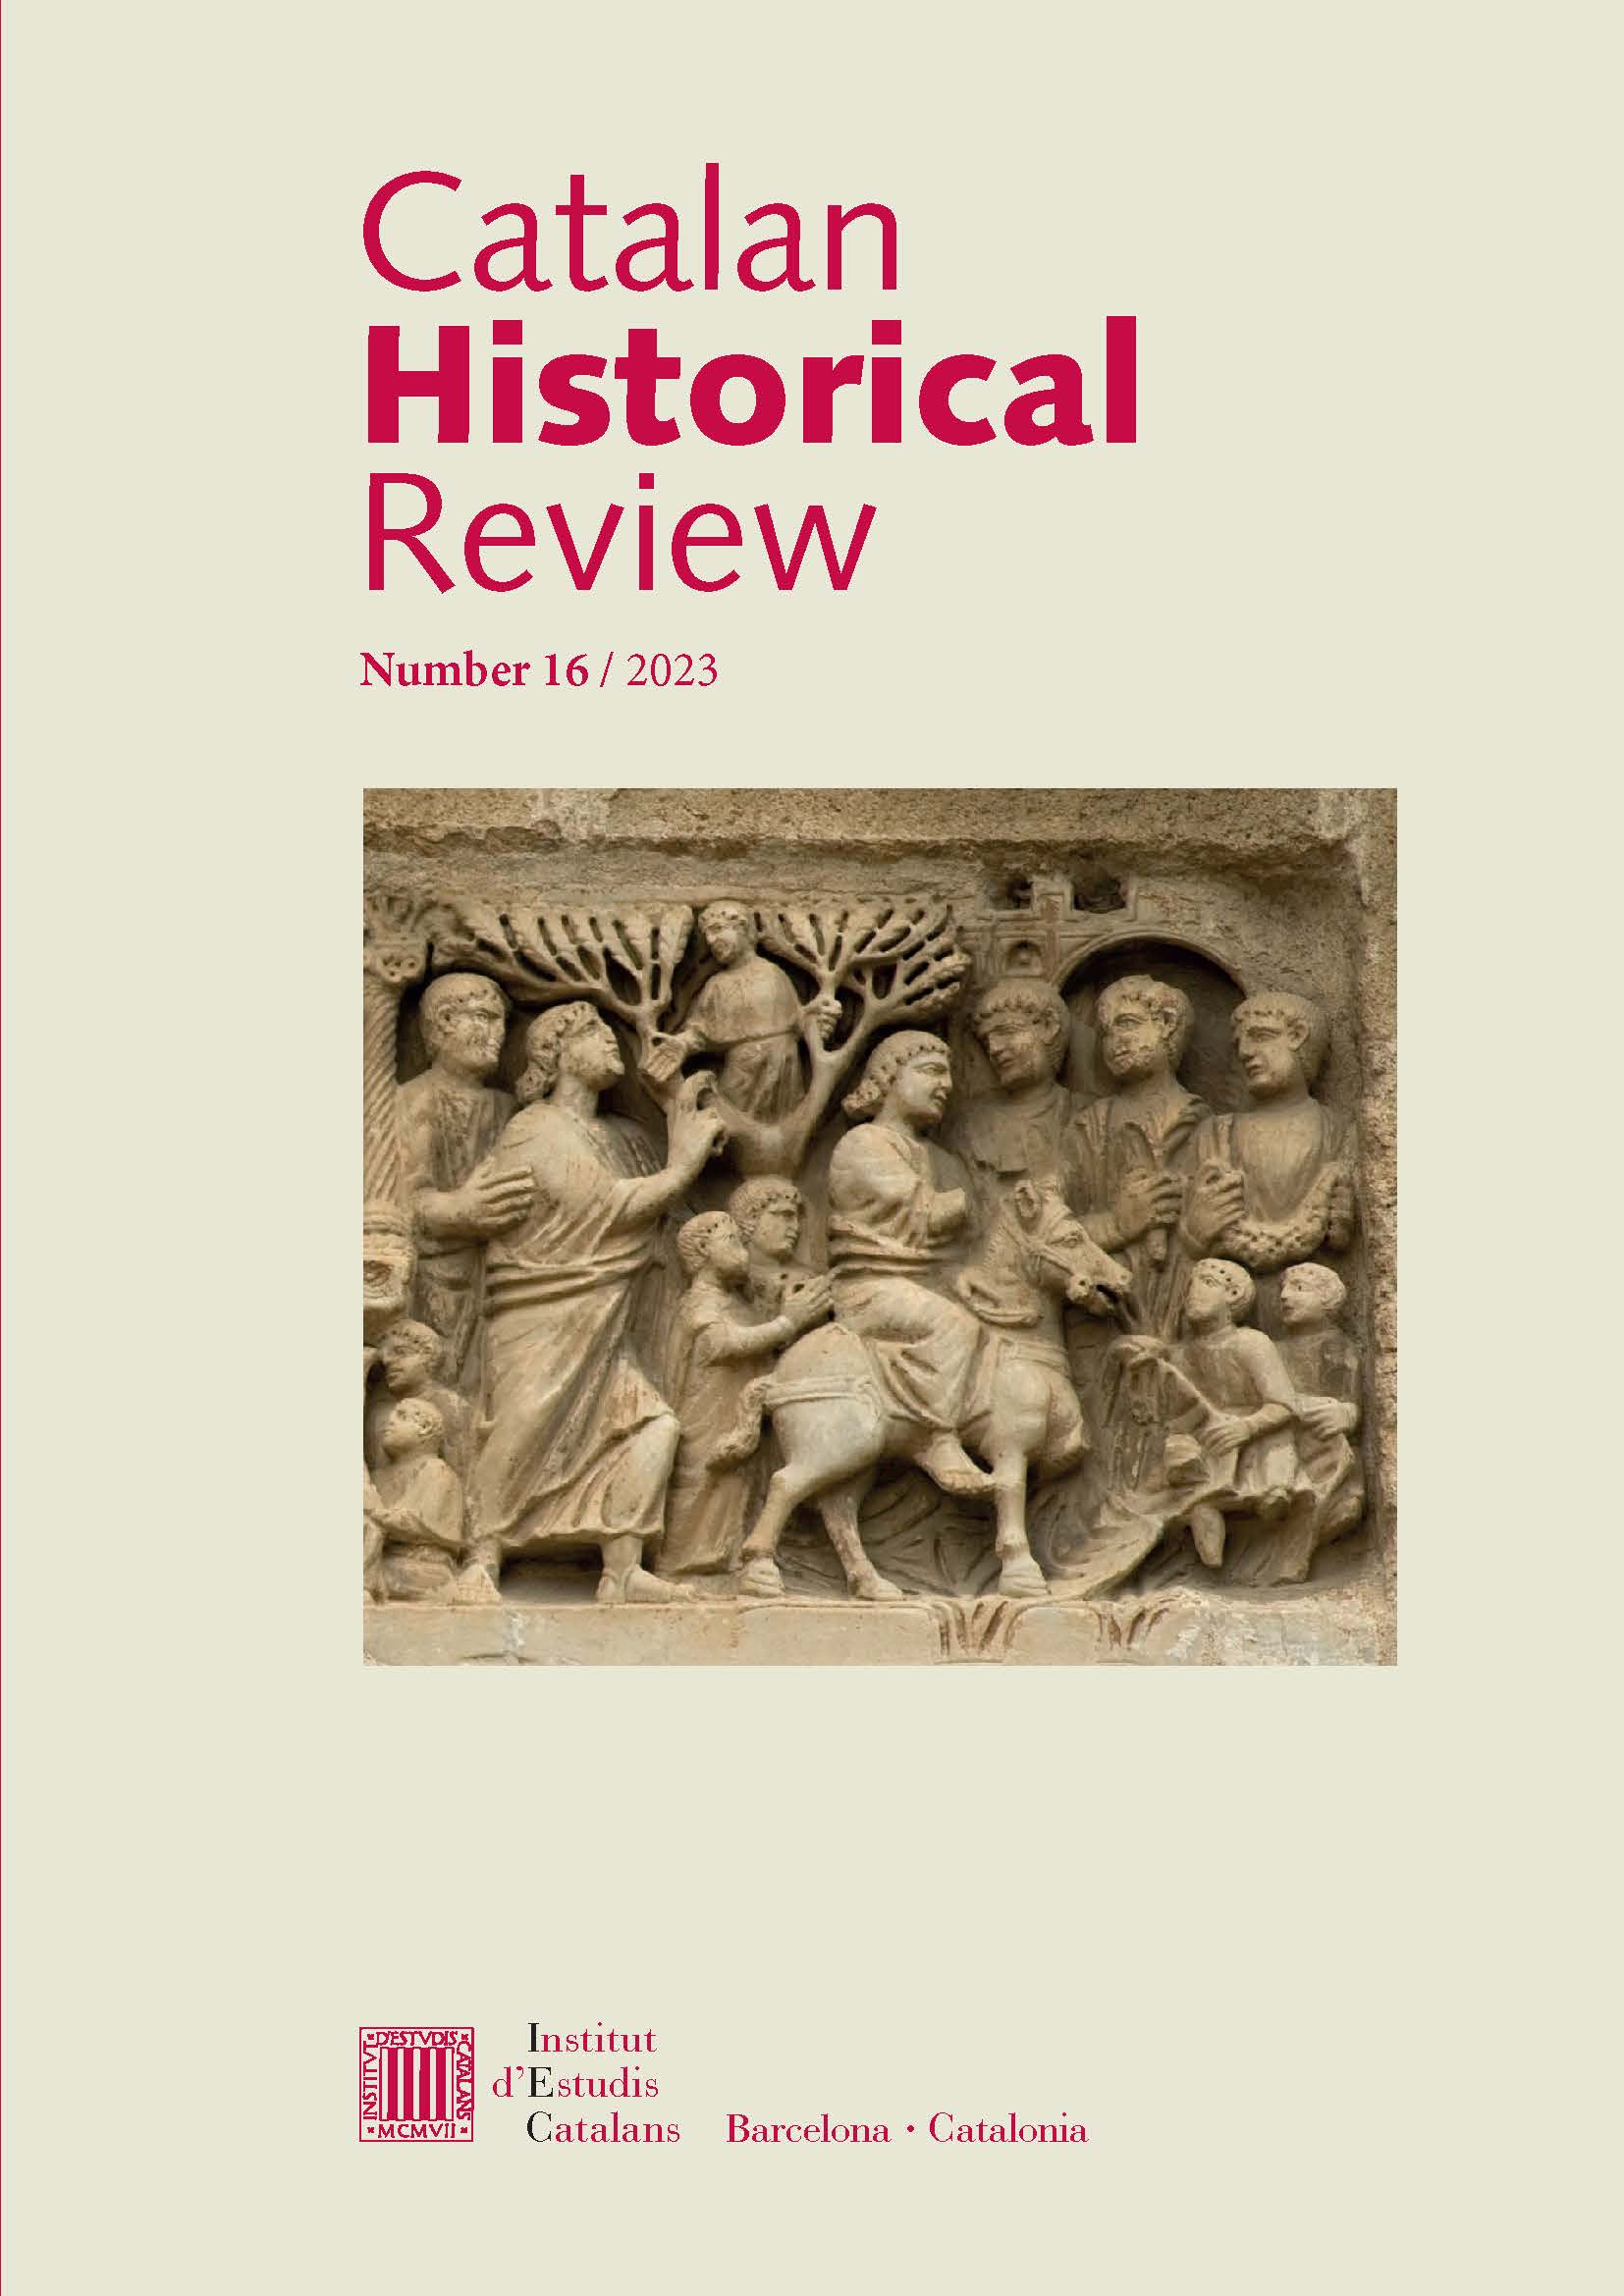 					View No. 16 (2023): Catalan Historical Review
				